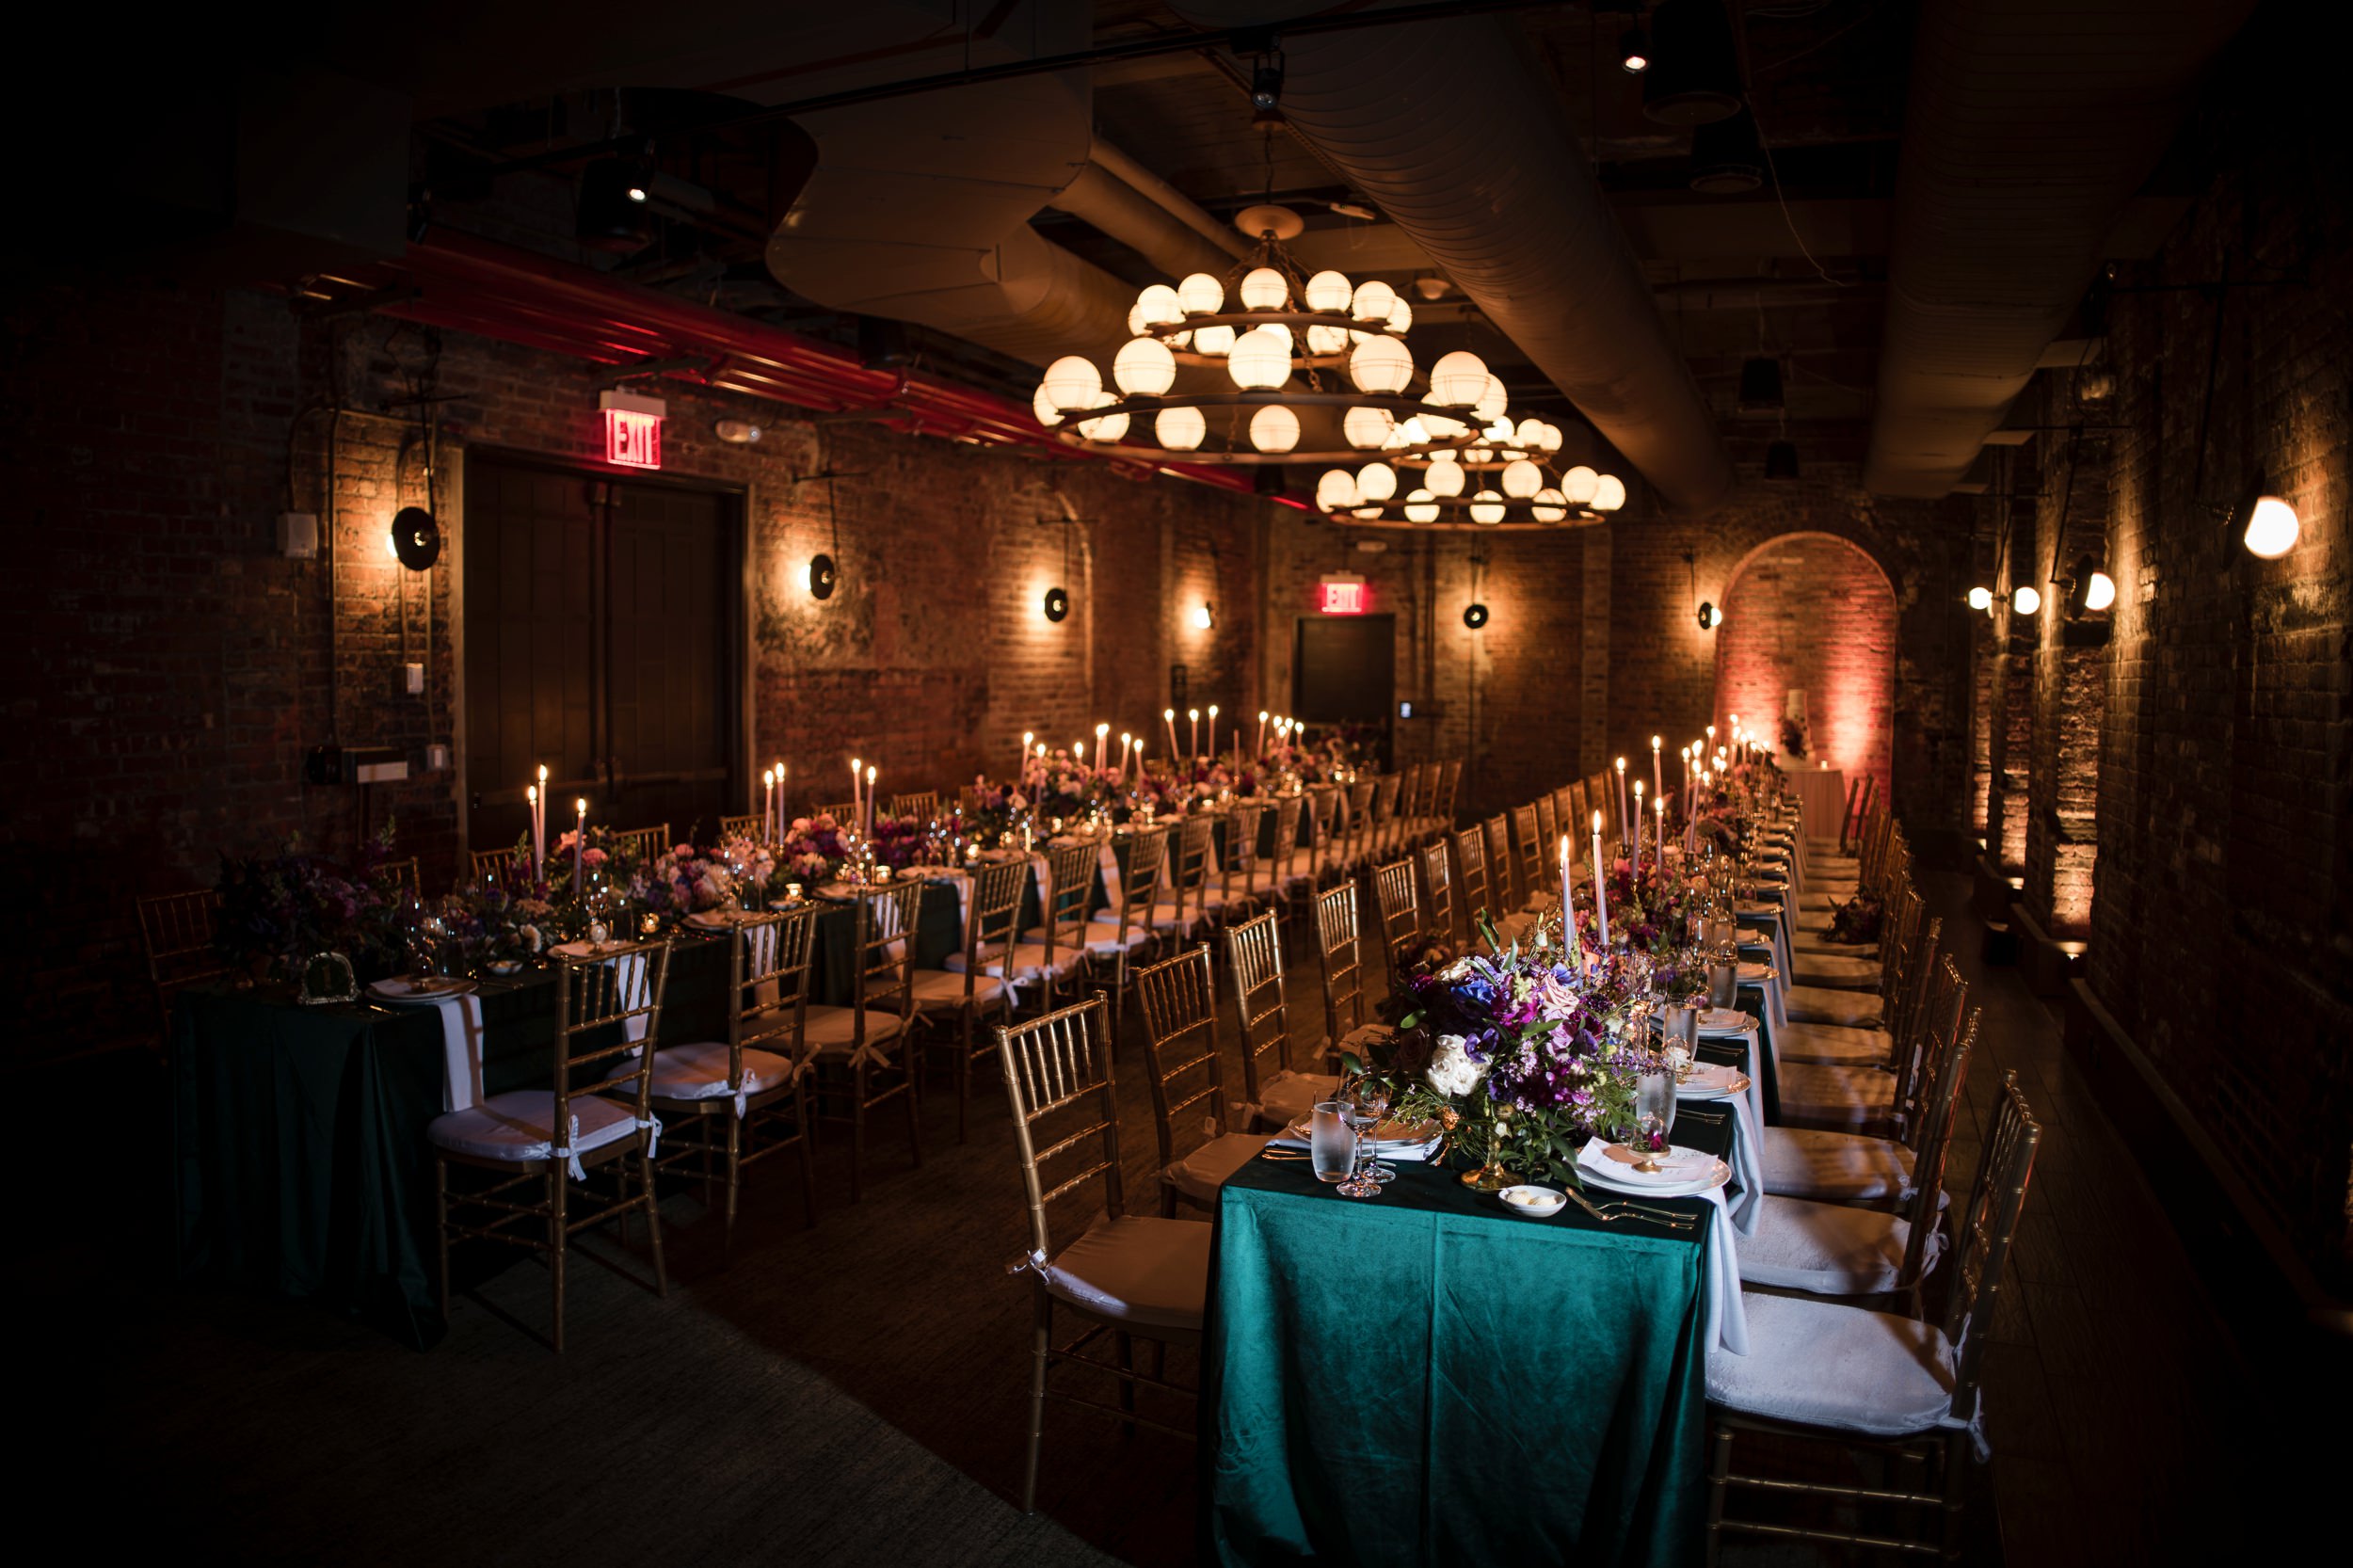 Dining room for a wedding reception at a Beekman Hotel wedding in NYC